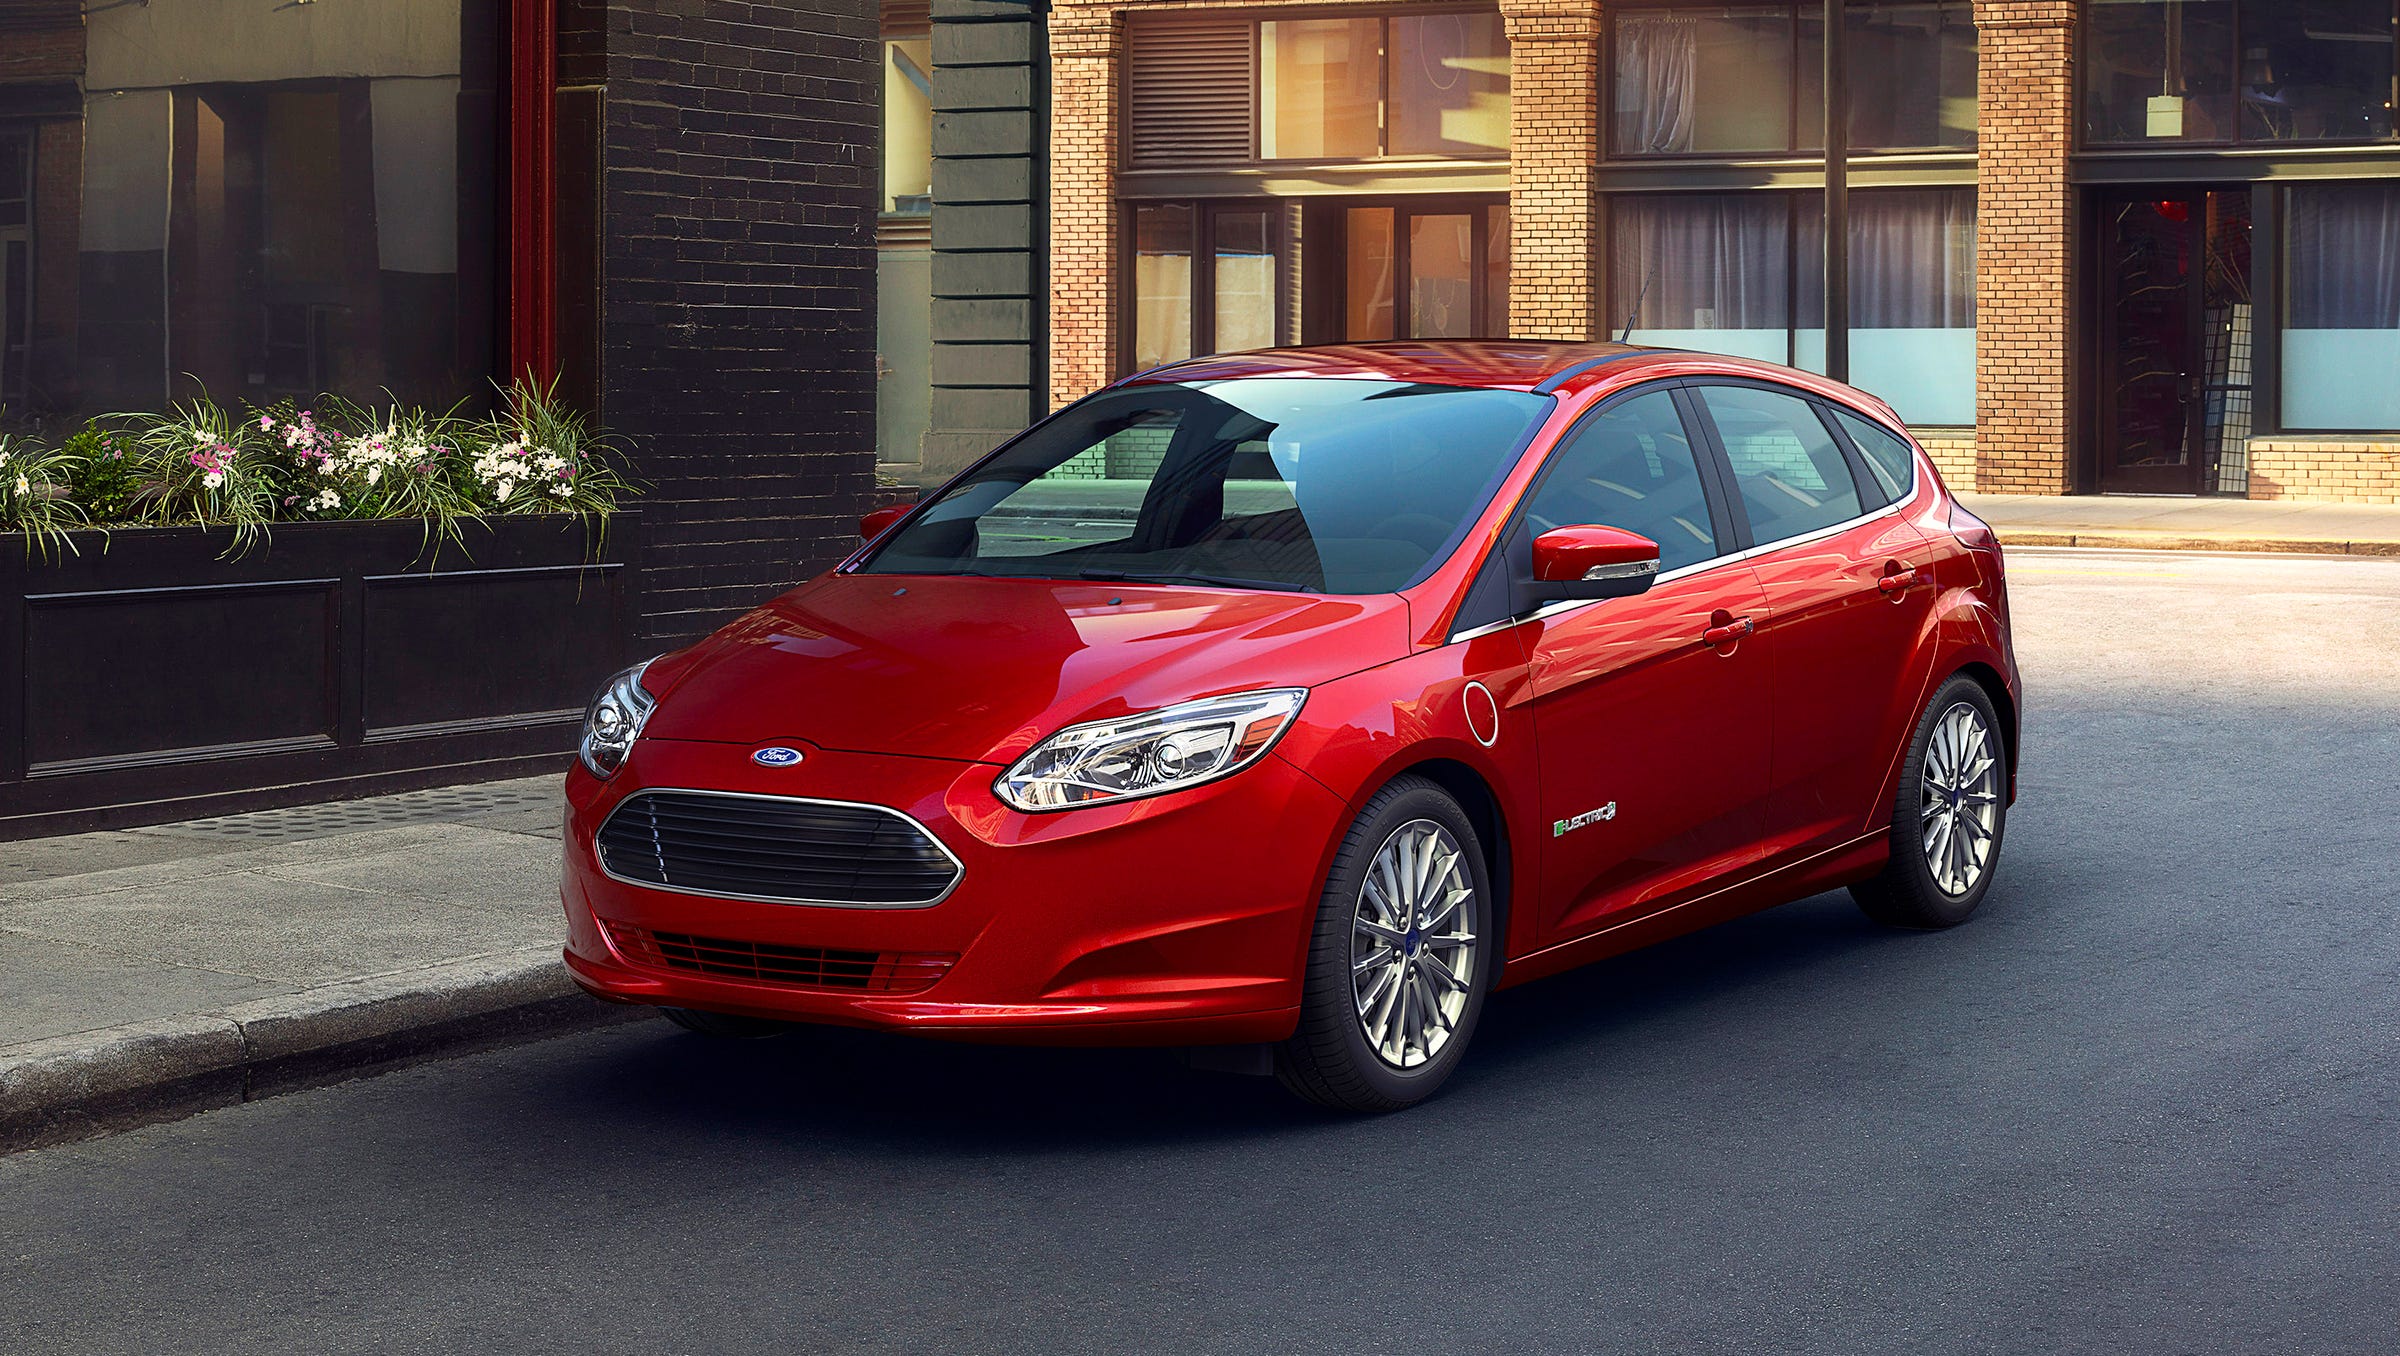 Ford recalls more than 50K electric car power cables